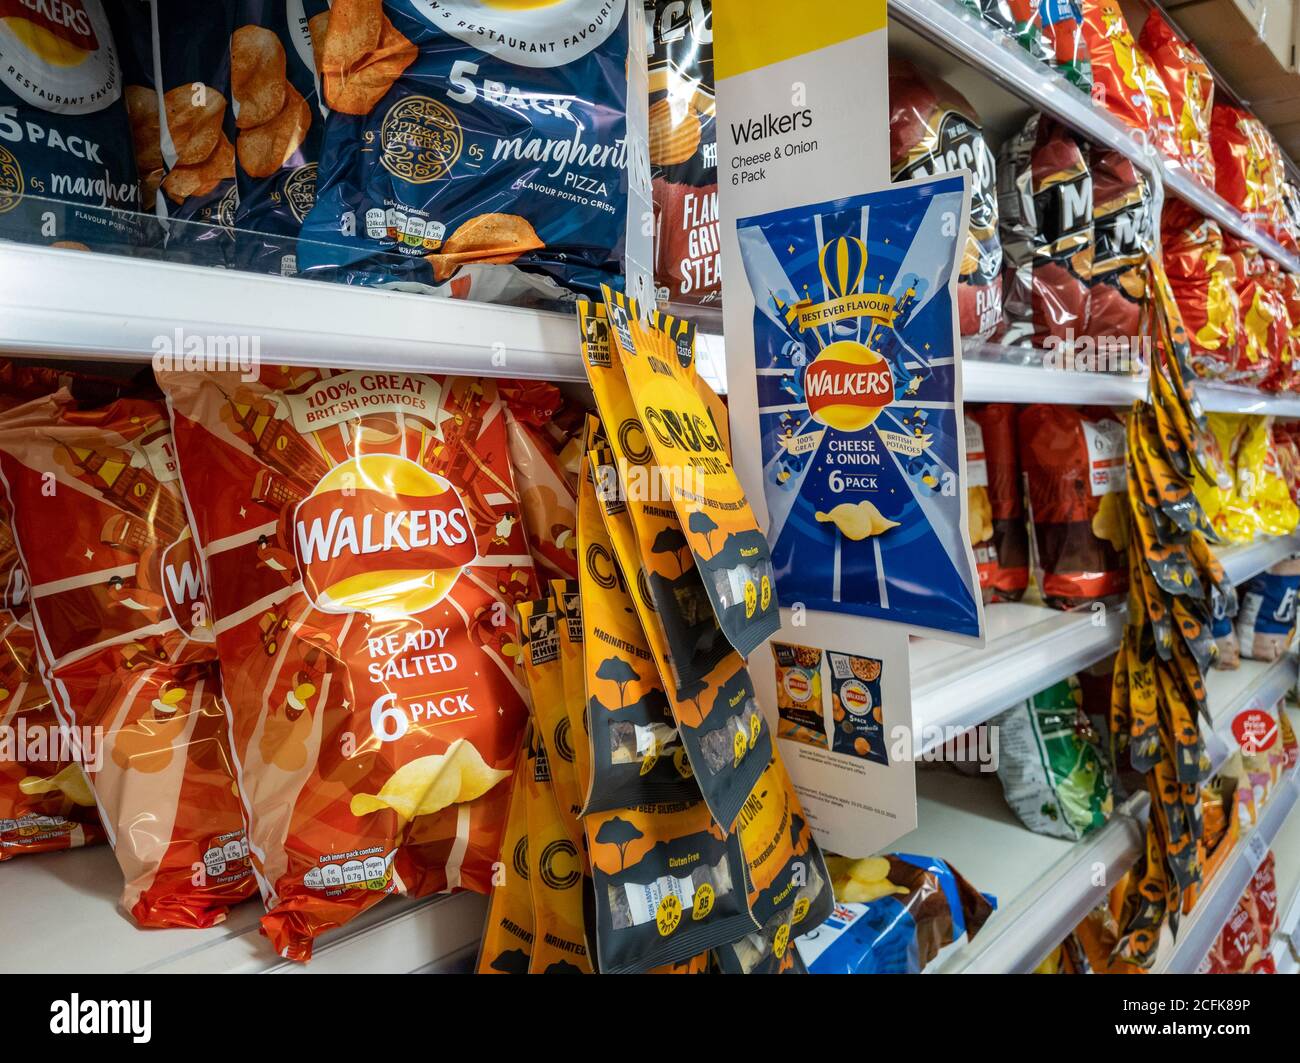 High fat, high calories junk food on offer in a supermarket. Stock Photo